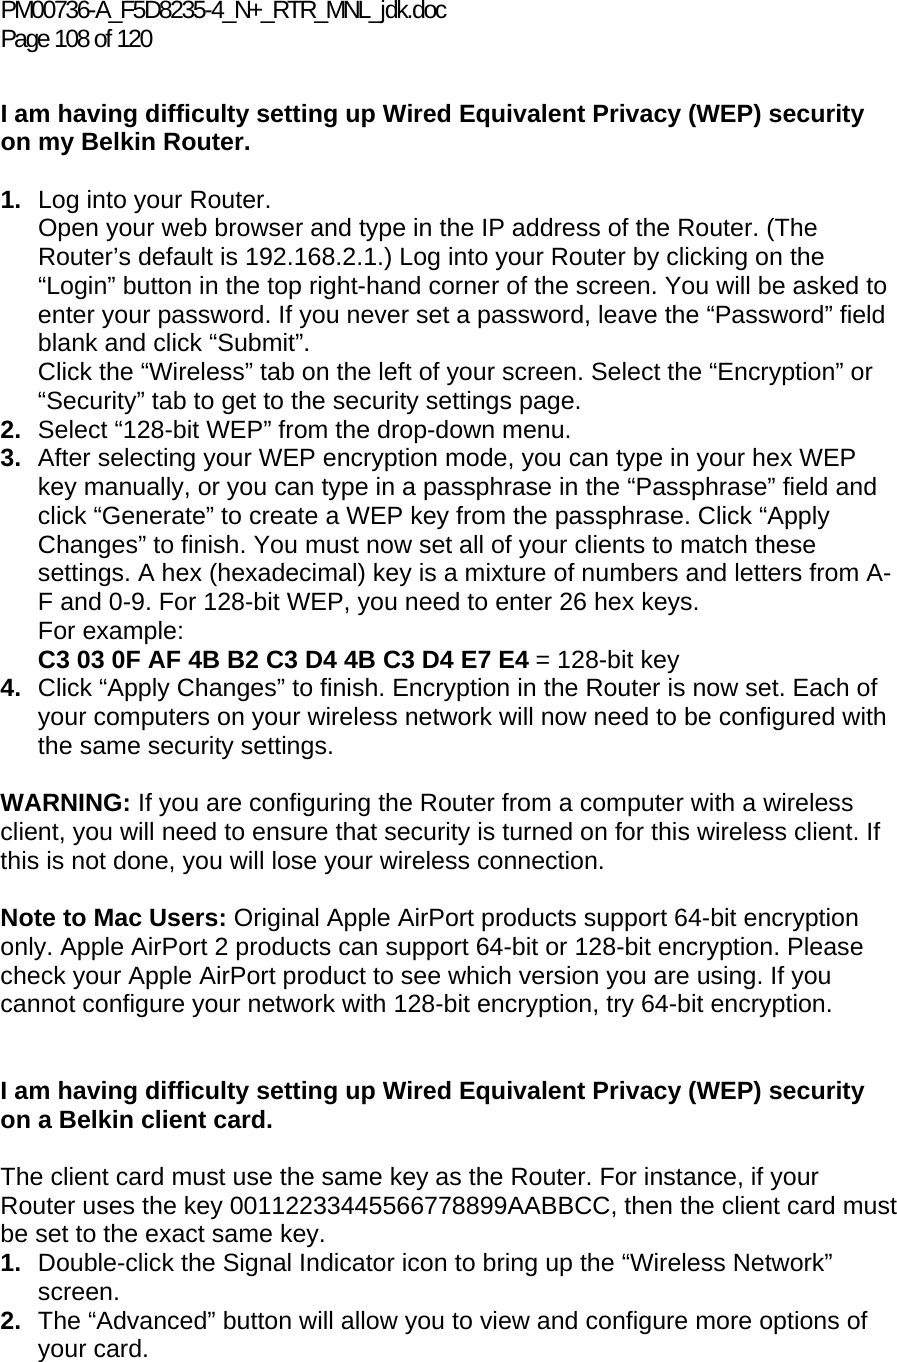 PM00736-A_F5D8235-4_N+_RTR_MNL_jdk.doc Page 108 of 120  I am having difficulty setting up Wired Equivalent Privacy (WEP) security on my Belkin Router.  1.  Log into your Router.  Open your web browser and type in the IP address of the Router. (The Router’s default is 192.168.2.1.) Log into your Router by clicking on the “Login” button in the top right-hand corner of the screen. You will be asked to enter your password. If you never set a password, leave the “Password” field blank and click “Submit”.  Click the “Wireless” tab on the left of your screen. Select the “Encryption” or “Security” tab to get to the security settings page. 2.  Select “128-bit WEP” from the drop-down menu. 3.  After selecting your WEP encryption mode, you can type in your hex WEP key manually, or you can type in a passphrase in the “Passphrase” field and click “Generate” to create a WEP key from the passphrase. Click “Apply Changes” to finish. You must now set all of your clients to match these settings. A hex (hexadecimal) key is a mixture of numbers and letters from A-F and 0-9. For 128-bit WEP, you need to enter 26 hex keys.  For example:  C3 03 0F AF 4B B2 C3 D4 4B C3 D4 E7 E4 = 128-bit key 4.  Click “Apply Changes” to finish. Encryption in the Router is now set. Each of your computers on your wireless network will now need to be configured with the same security settings.   WARNING: If you are configuring the Router from a computer with a wireless client, you will need to ensure that security is turned on for this wireless client. If this is not done, you will lose your wireless connection.  Note to Mac Users: Original Apple AirPort products support 64-bit encryption only. Apple AirPort 2 products can support 64-bit or 128-bit encryption. Please check your Apple AirPort product to see which version you are using. If you cannot configure your network with 128-bit encryption, try 64-bit encryption.    I am having difficulty setting up Wired Equivalent Privacy (WEP) security on a Belkin client card.  The client card must use the same key as the Router. For instance, if your Router uses the key 00112233445566778899AABBCC, then the client card must be set to the exact same key. 1.  Double-click the Signal Indicator icon to bring up the “Wireless Network” screen.  2.  The “Advanced” button will allow you to view and configure more options of your card. 